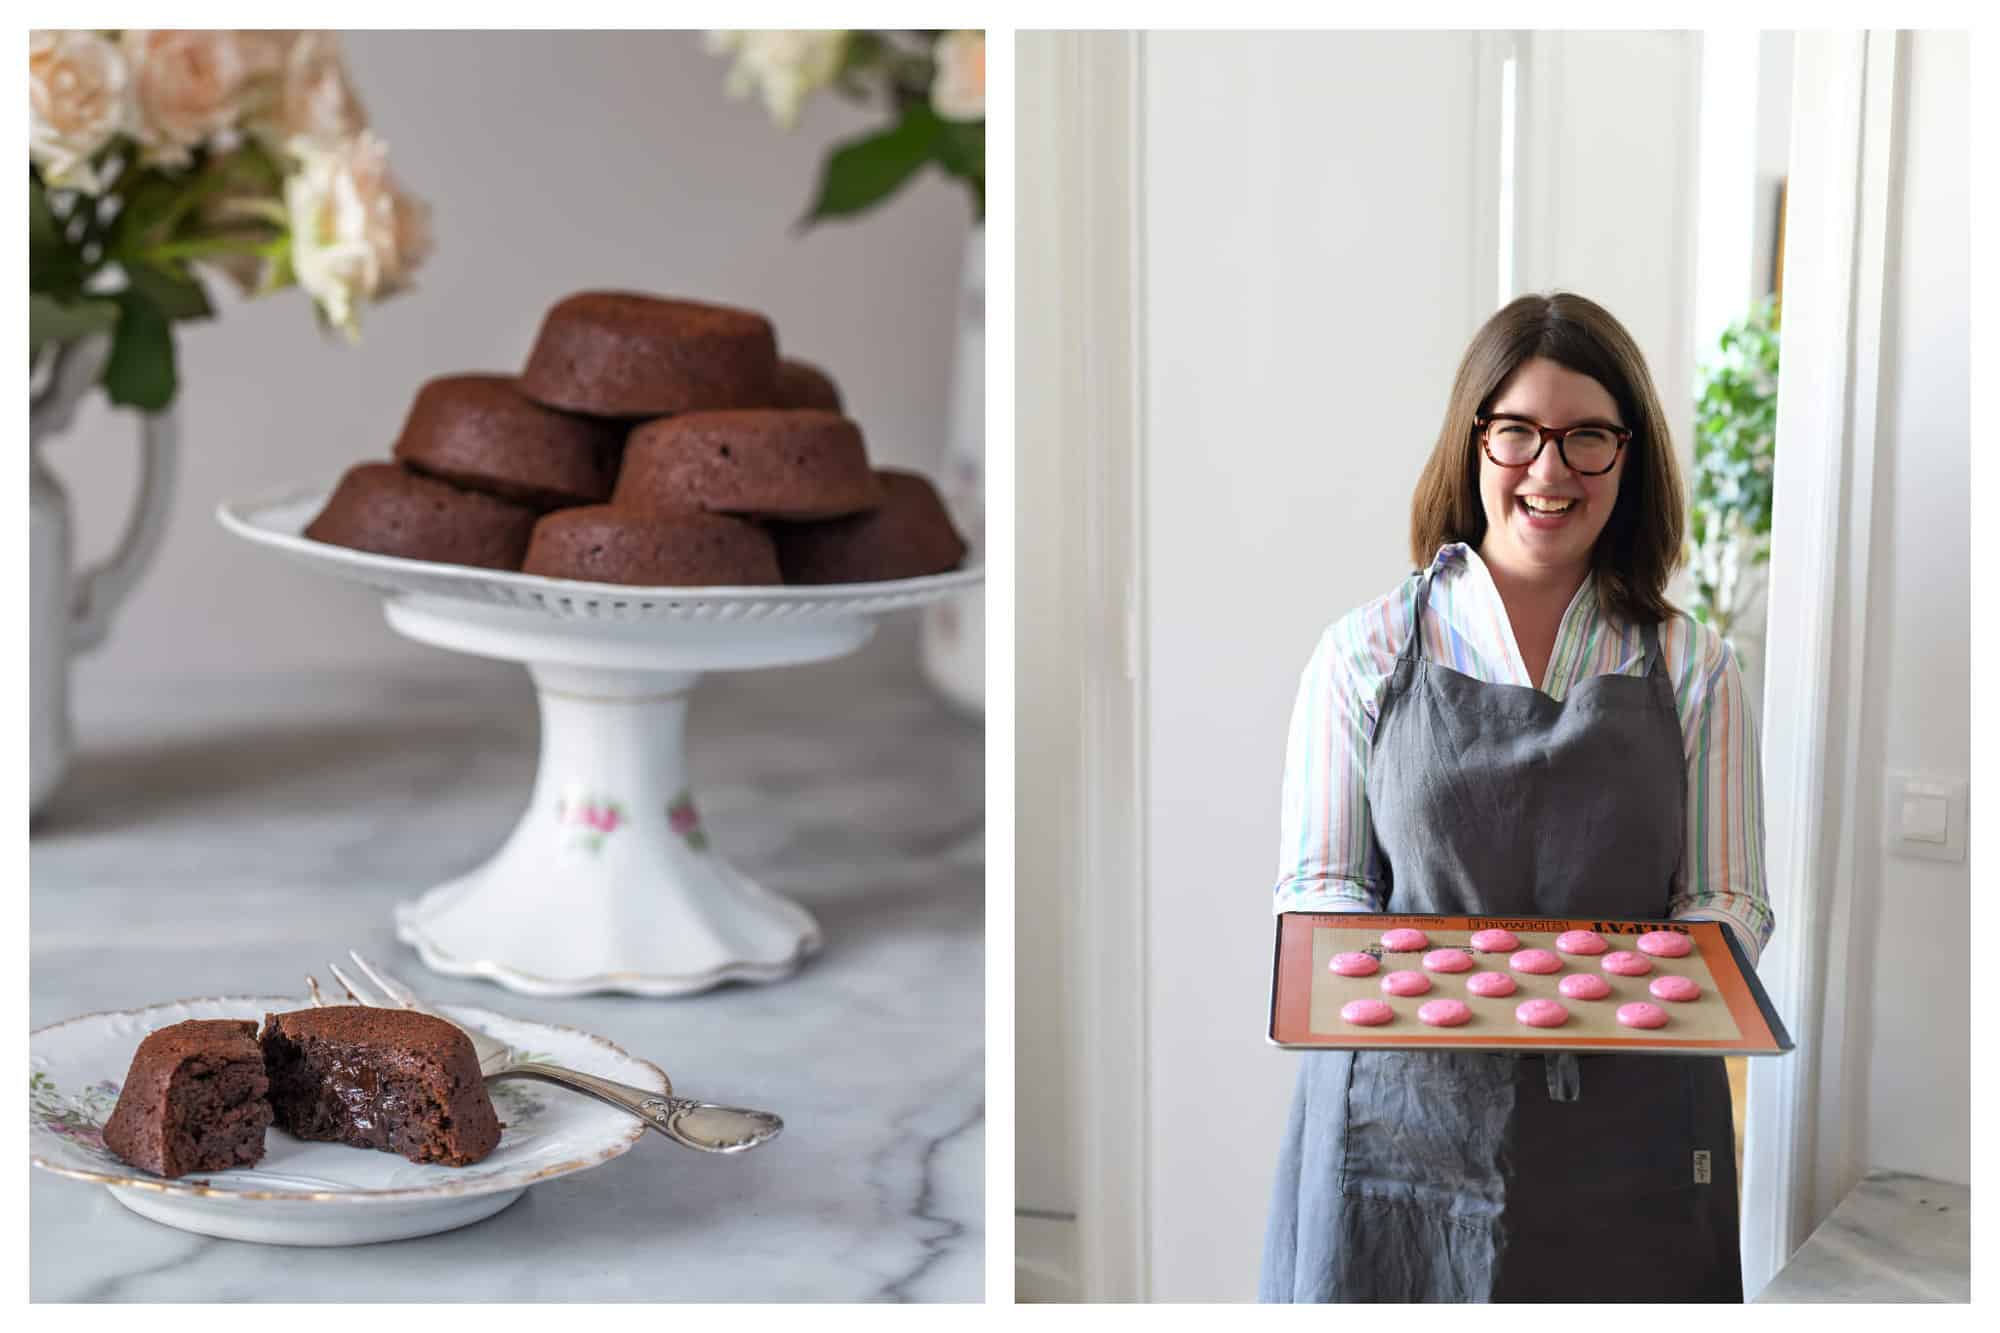 left: moelleux au chocolat decorated on a white dessert tray. Right: Chef Molly Wilkinson poses with a tray full of French pastry, which are pink in color